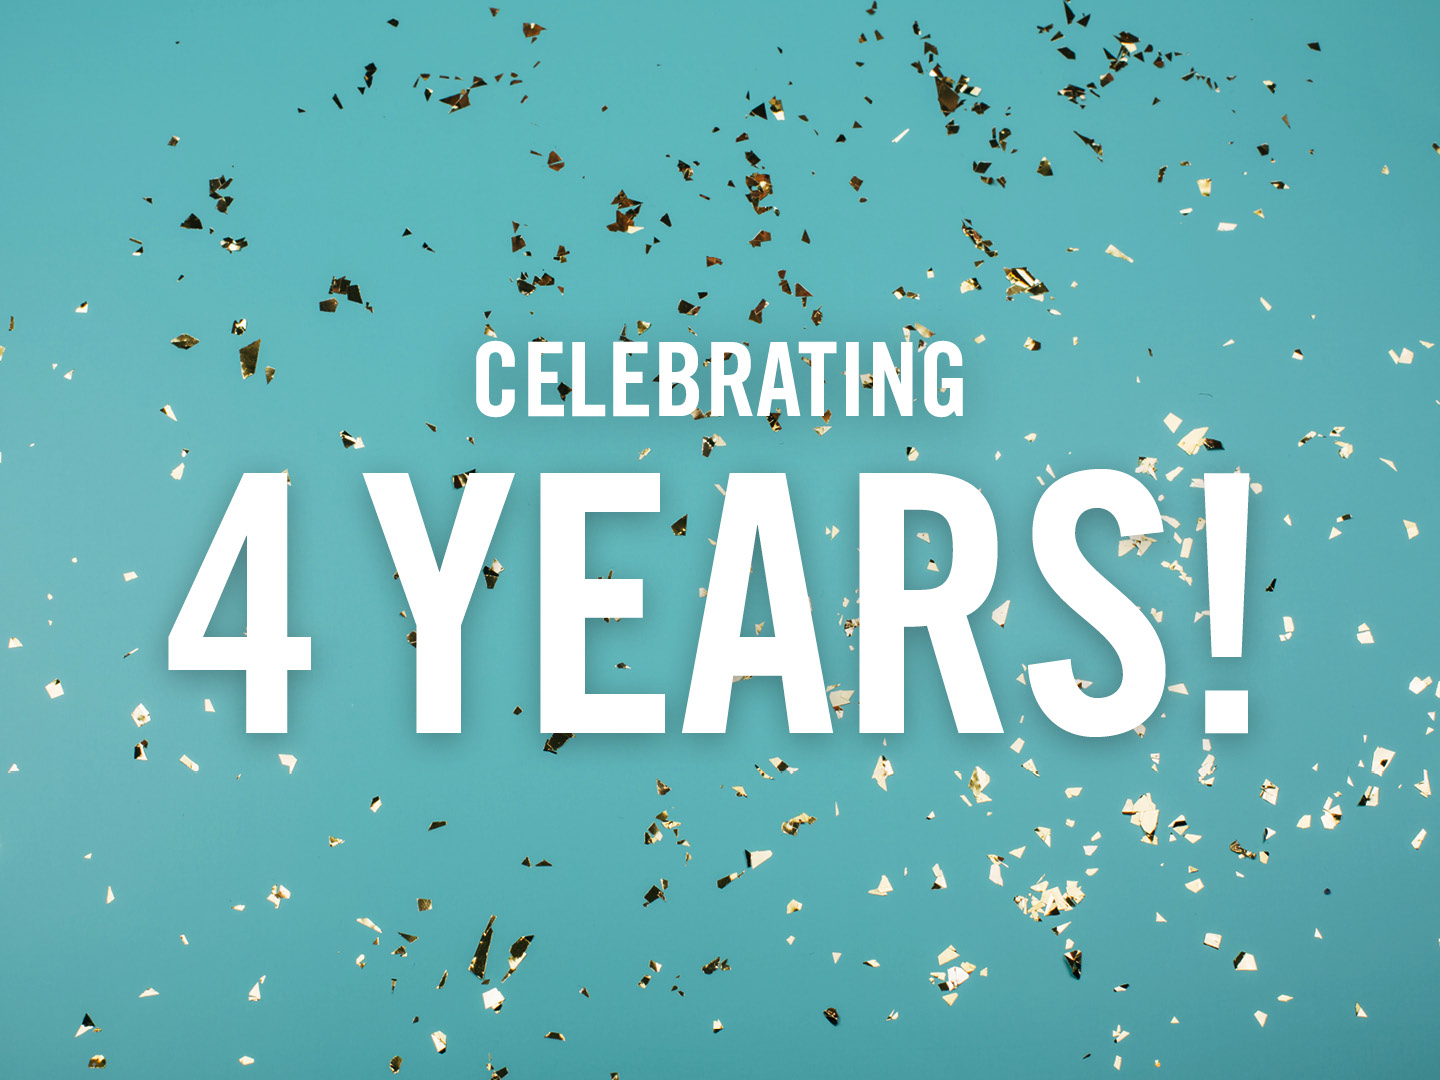 Text saying "Celebrating 4 Years" with confetti on a teal background